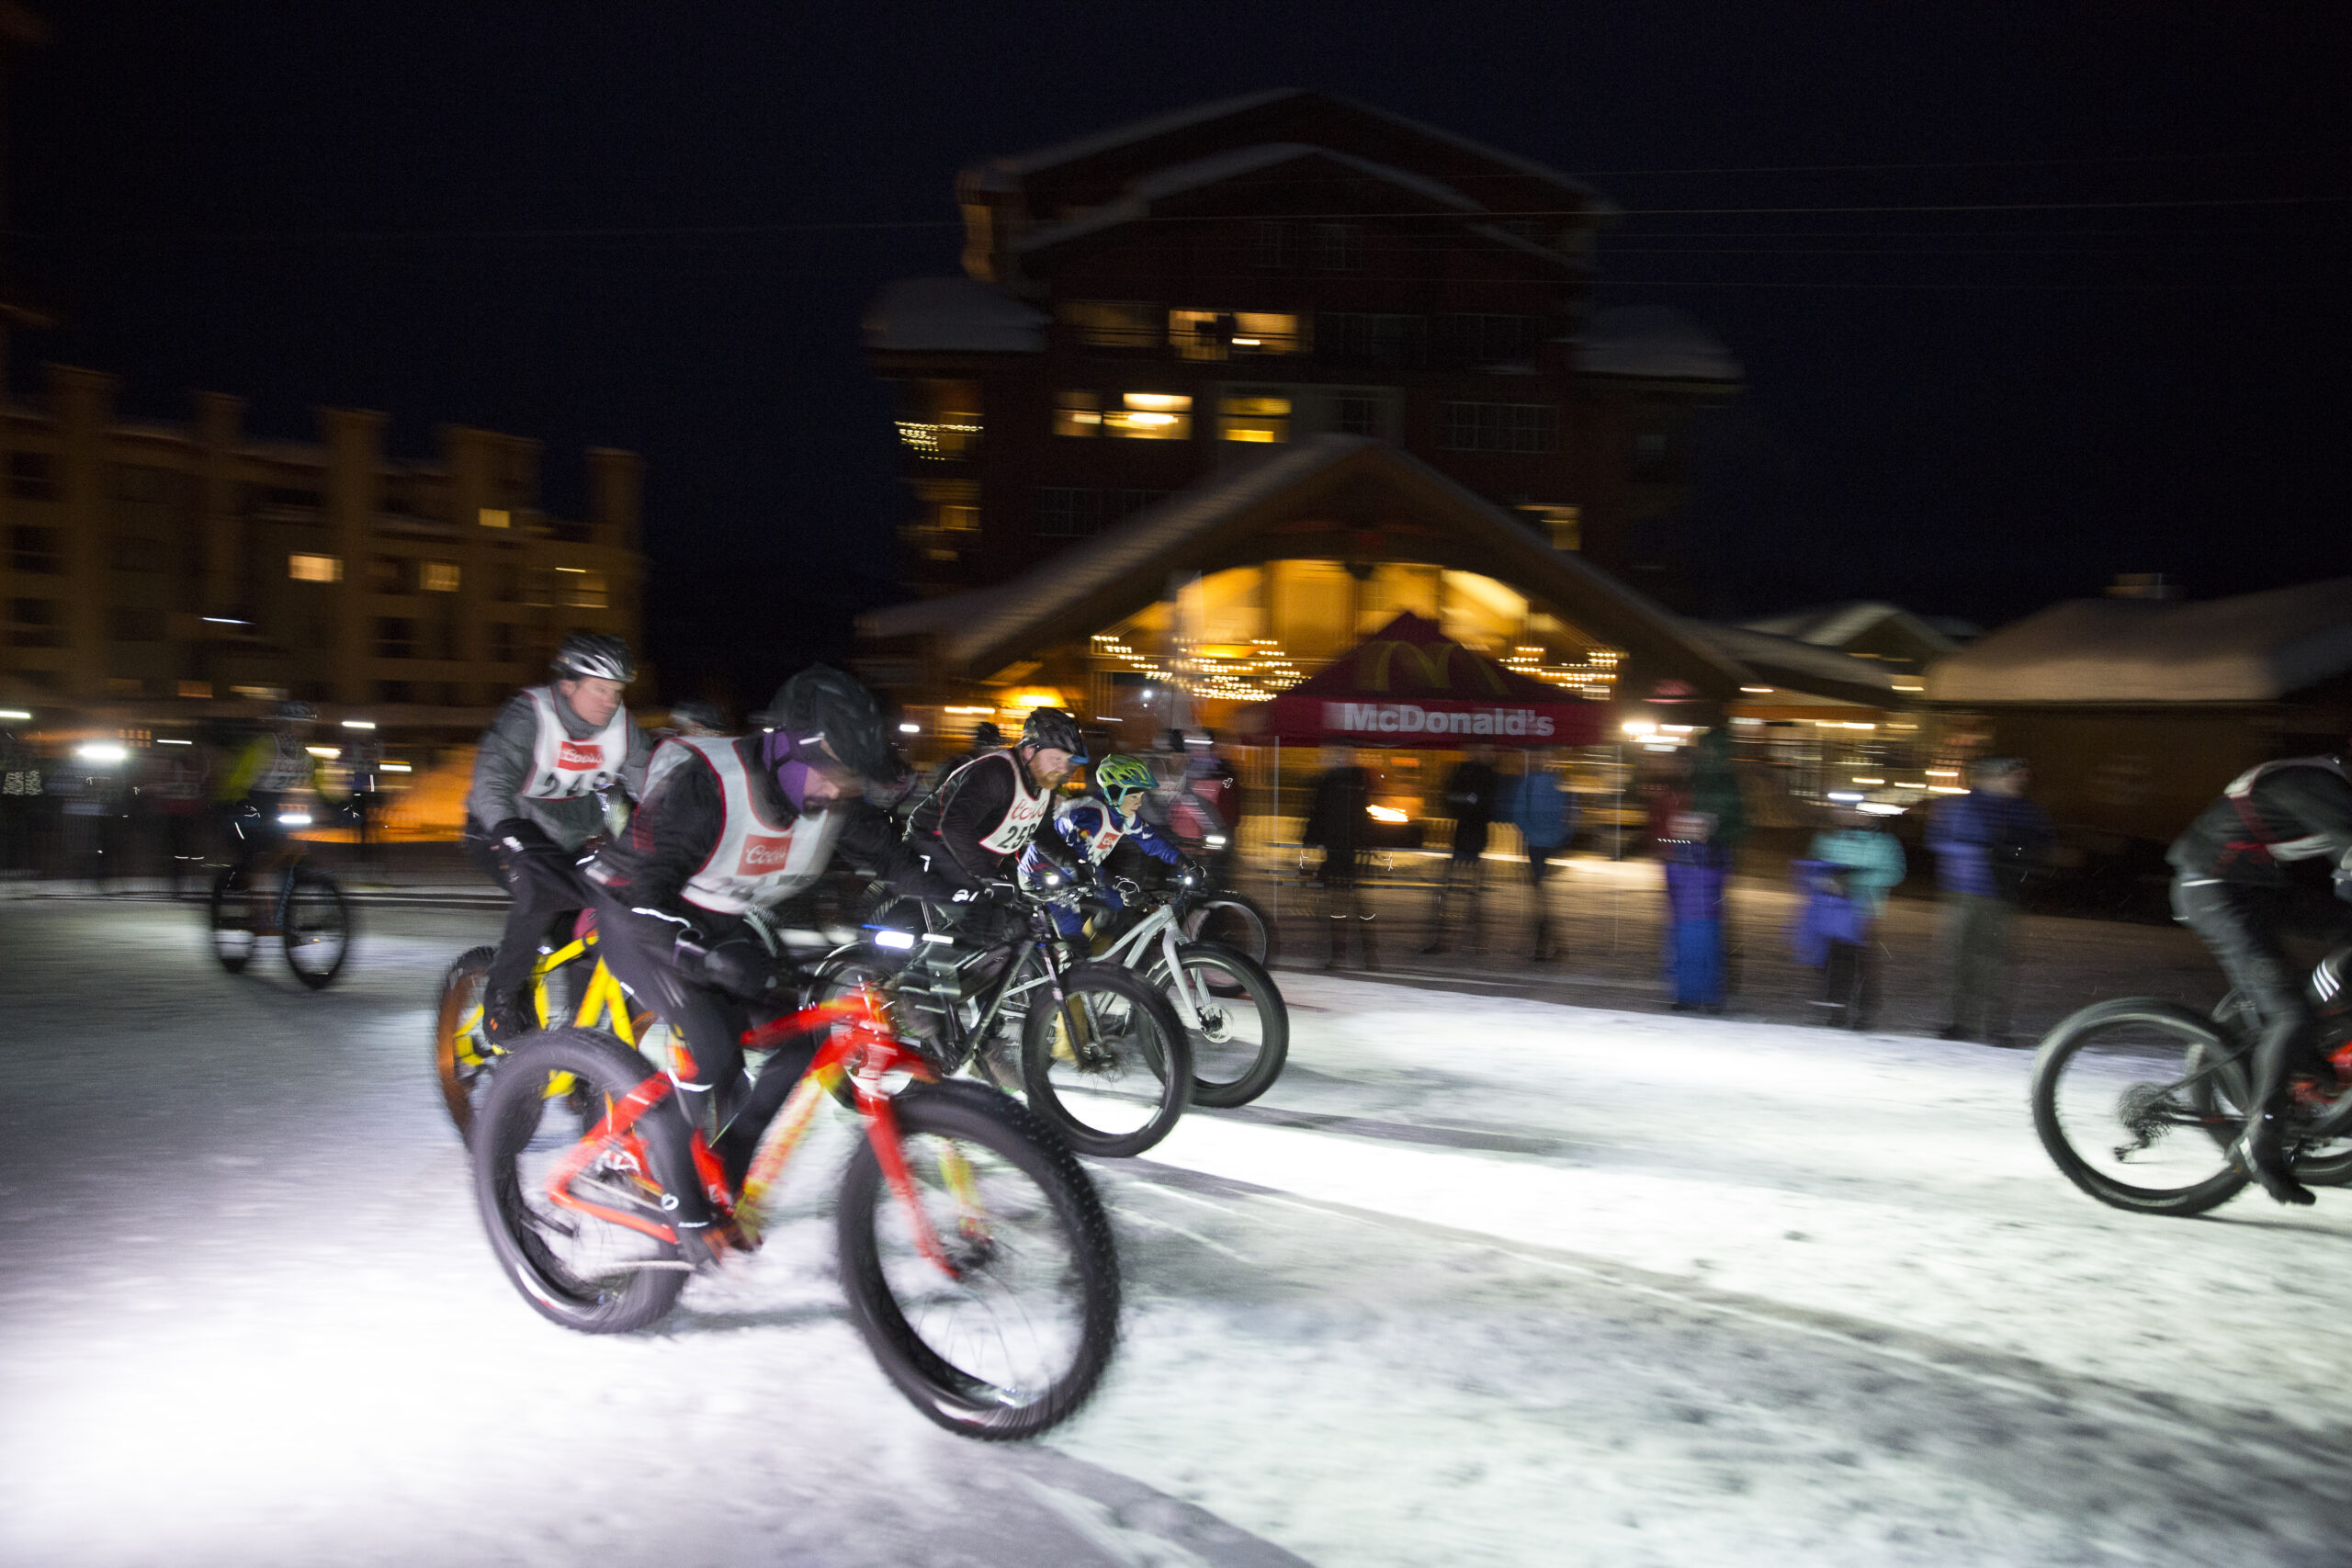 Racers on fat bikes set off in the dark during the McDonald's Winter Triathlon